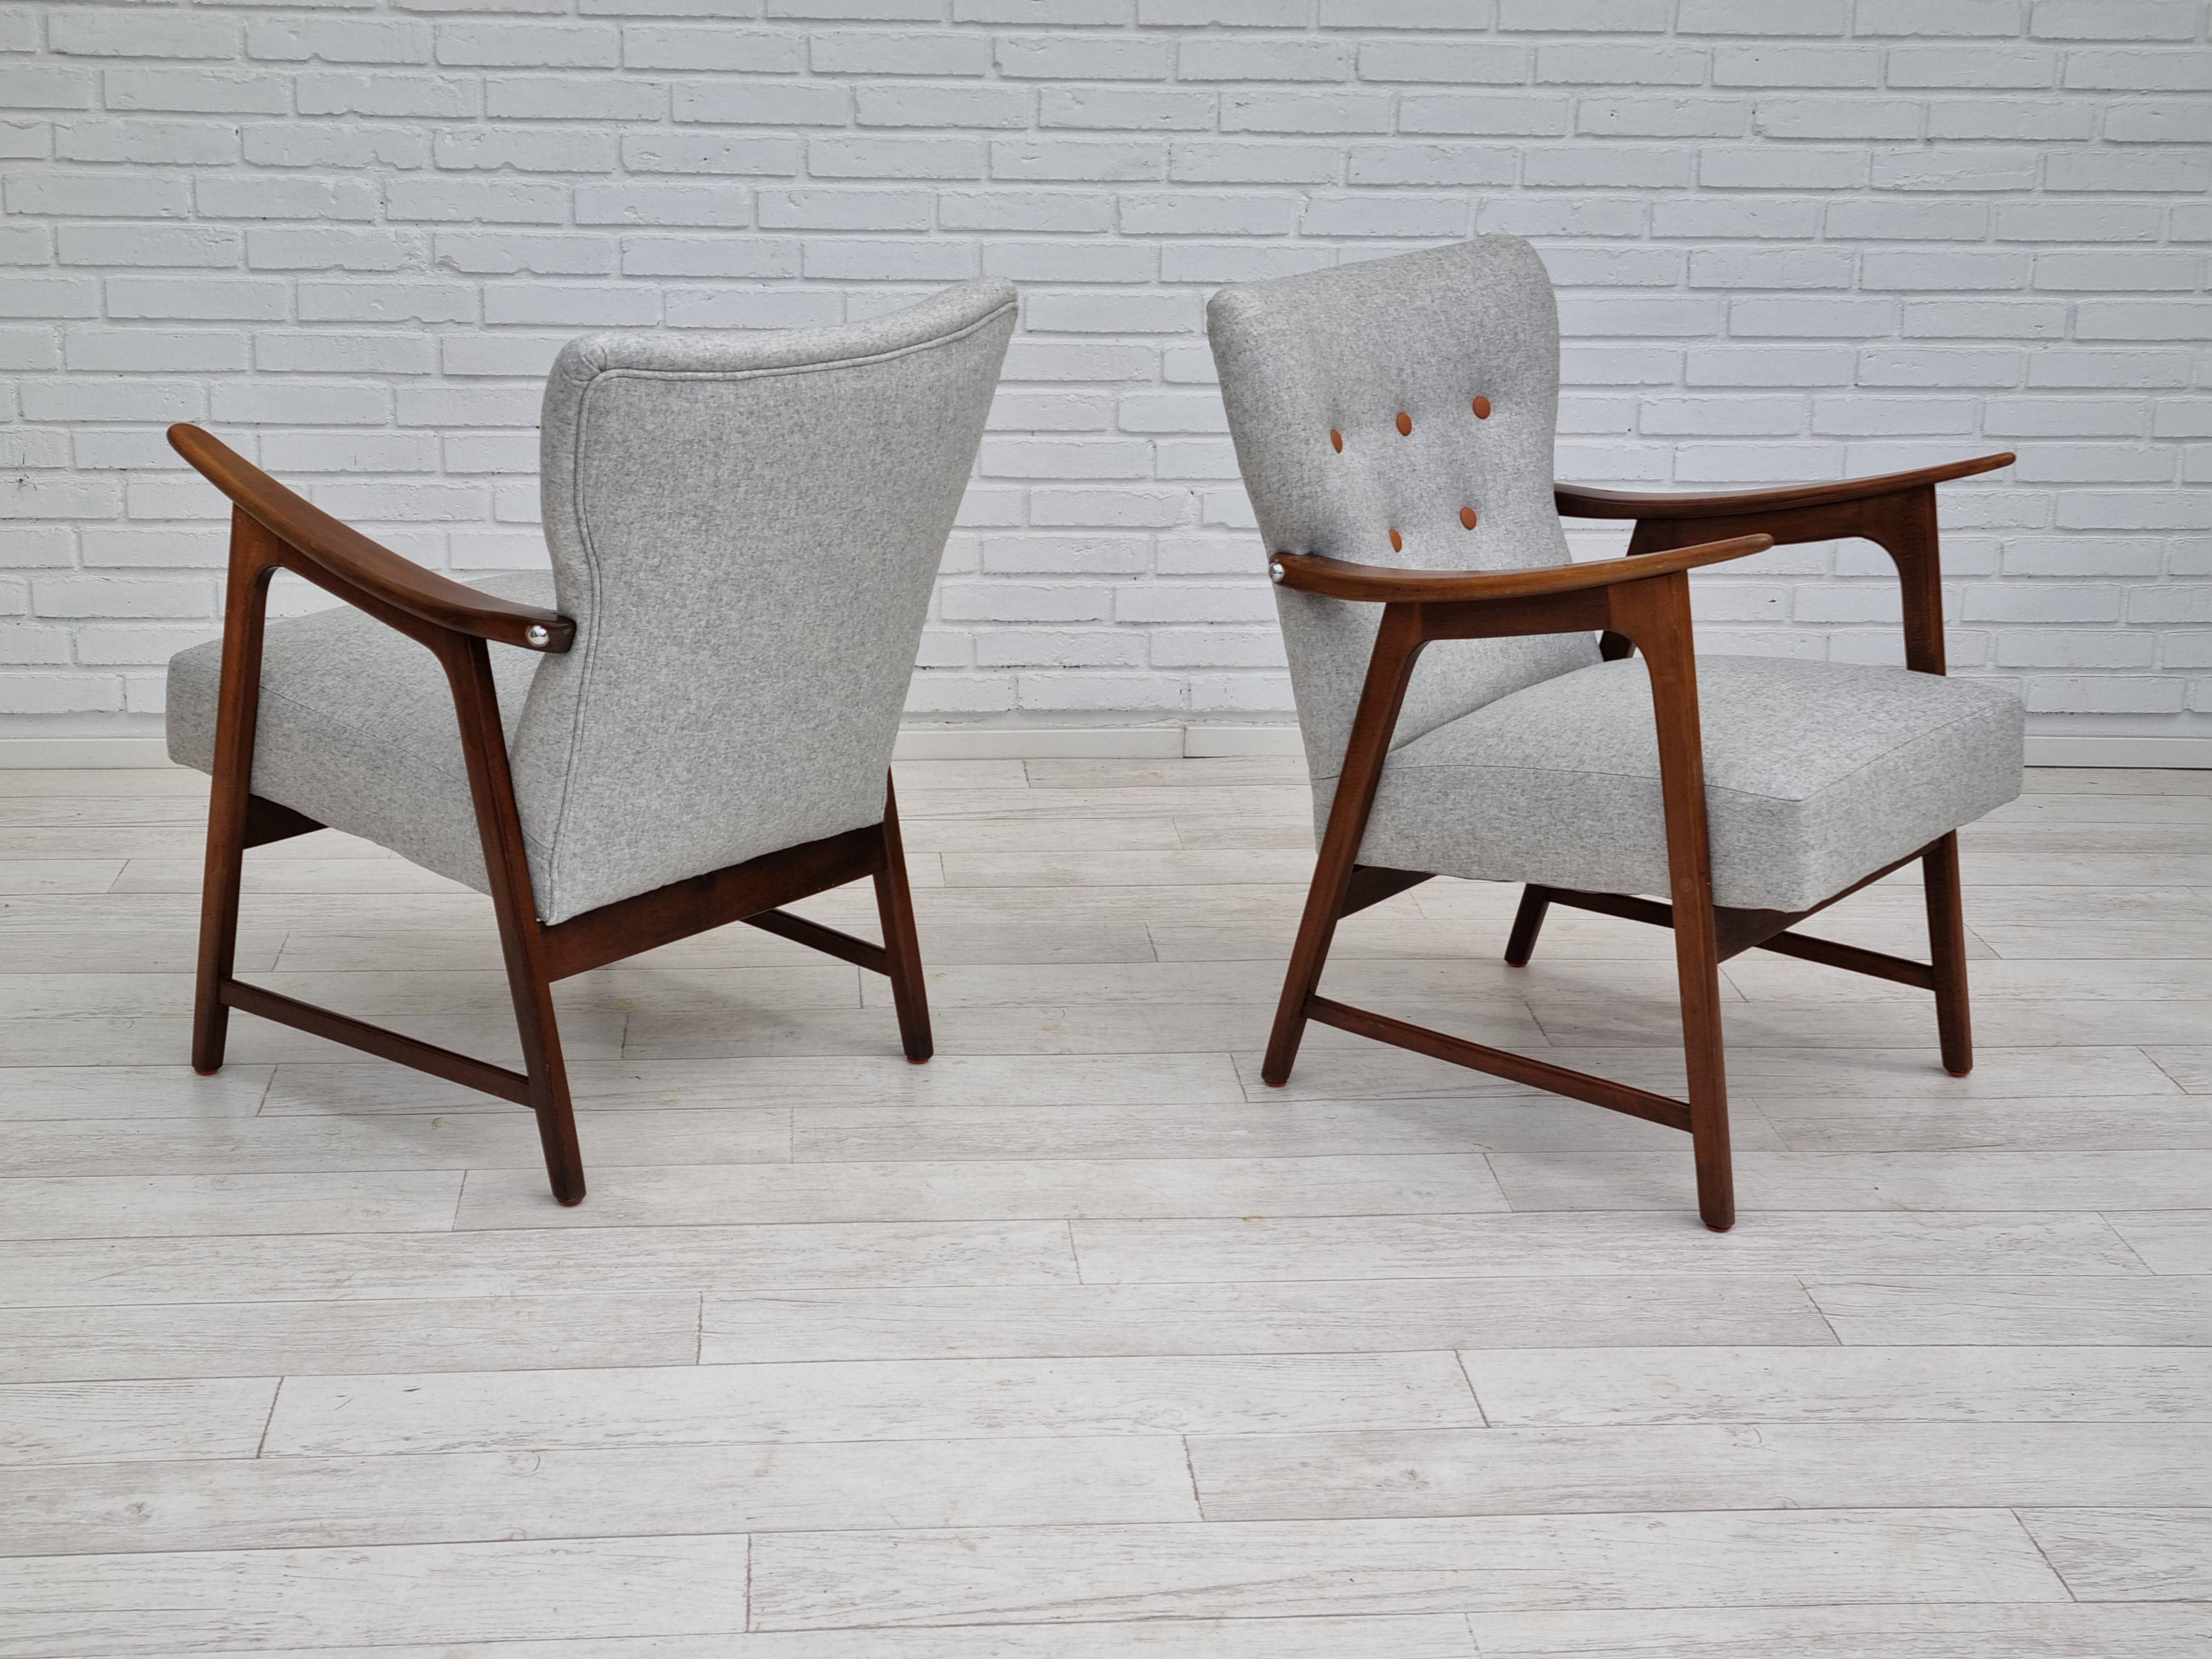 Mid-20th Century 60s, Danish Armchair, Fabric, Beech Wood, Completely Reupholstered